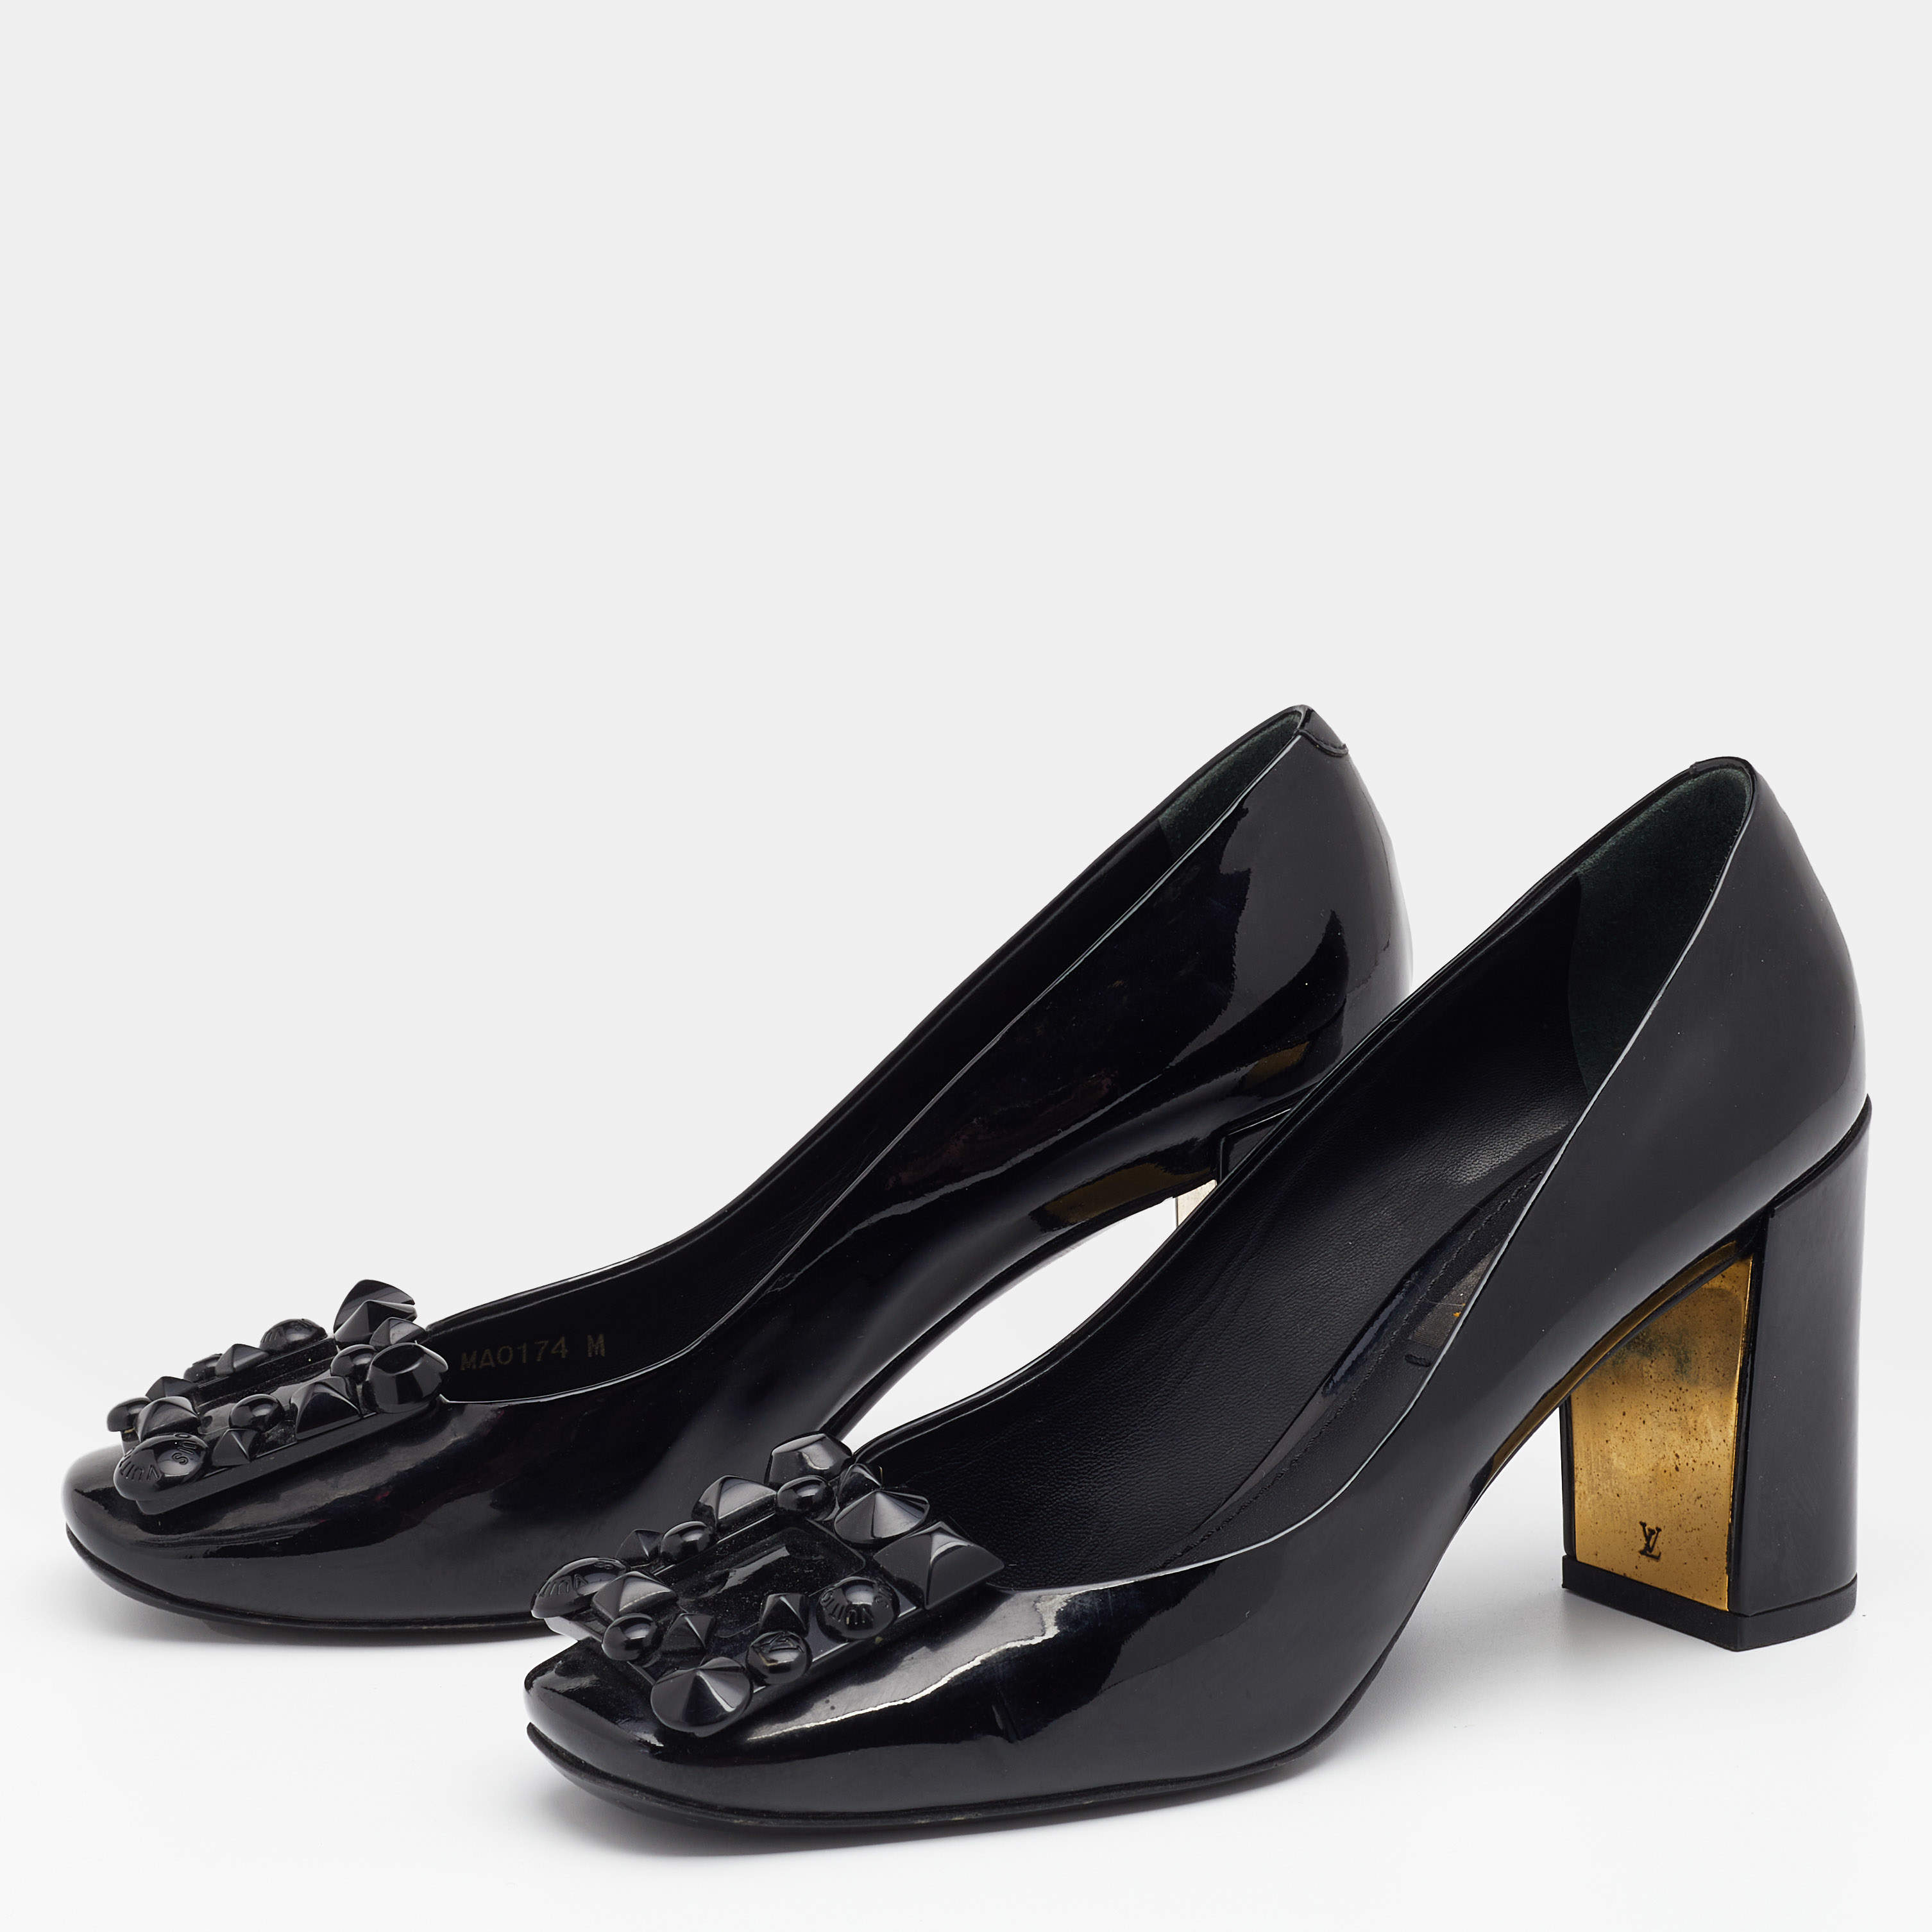 Products by Louis Vuitton: Bliss Multistrap Pump